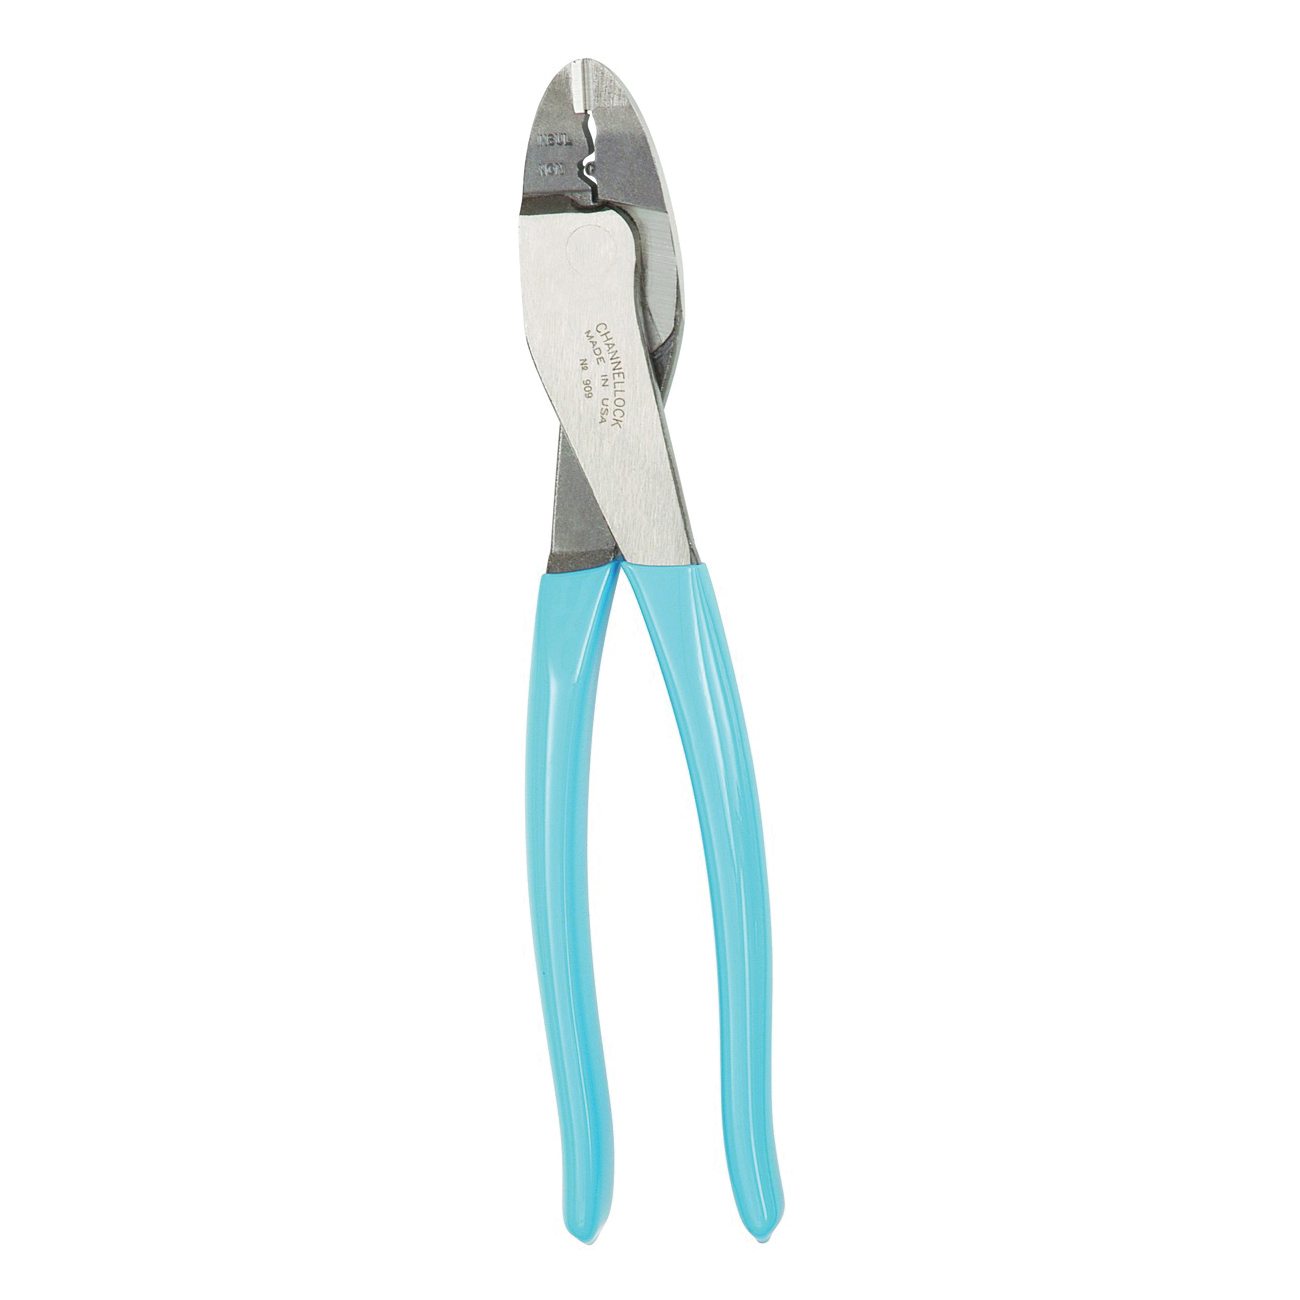 CHANNELLOCK 909 Crimping Plier, 22 to 10 AWG Wire, 22 to 10 AWG Cutting Capacity, 9-1/2 in OAL, Comfort-Grip Handle - 1